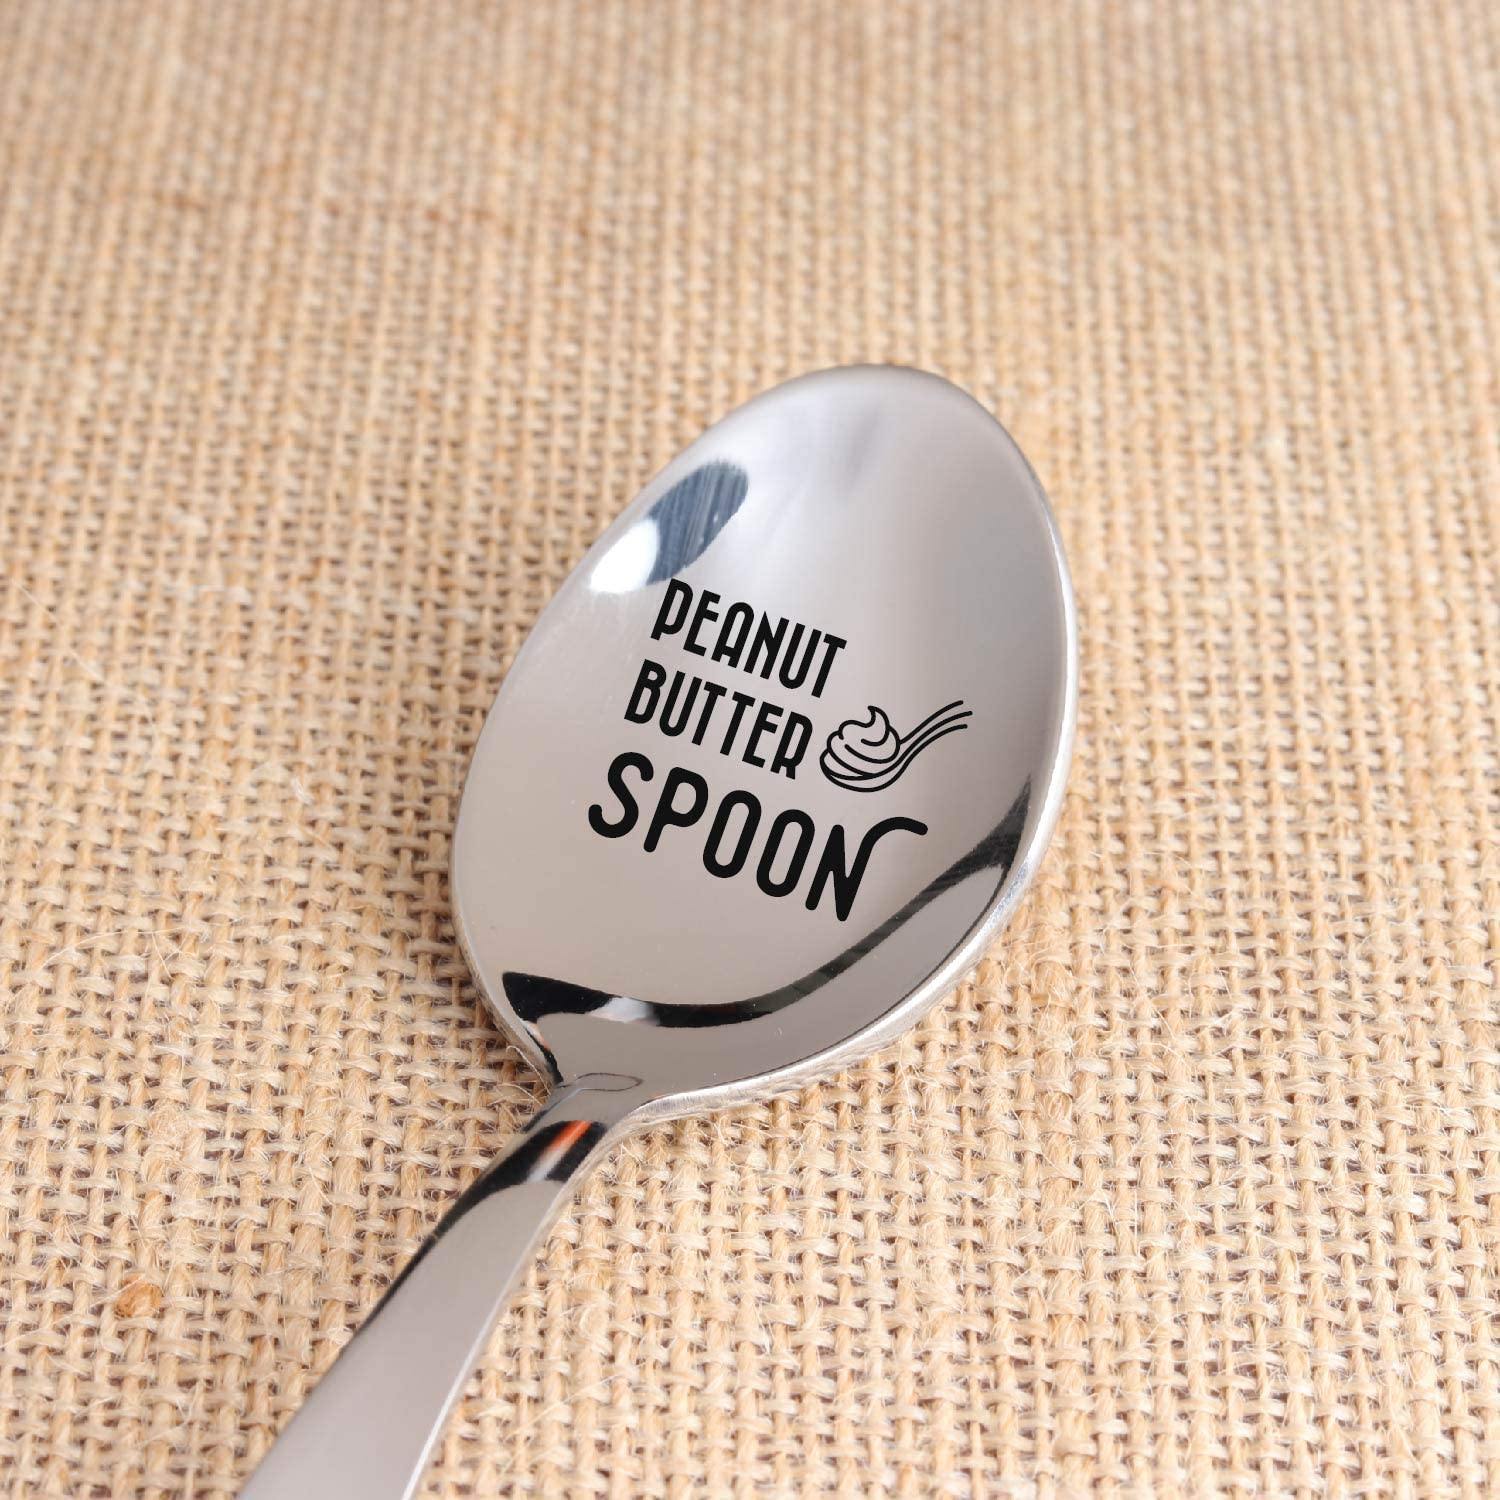 Peanut butter spoon black engraving amazin gift - Royal Spoons - Best gifts  ever